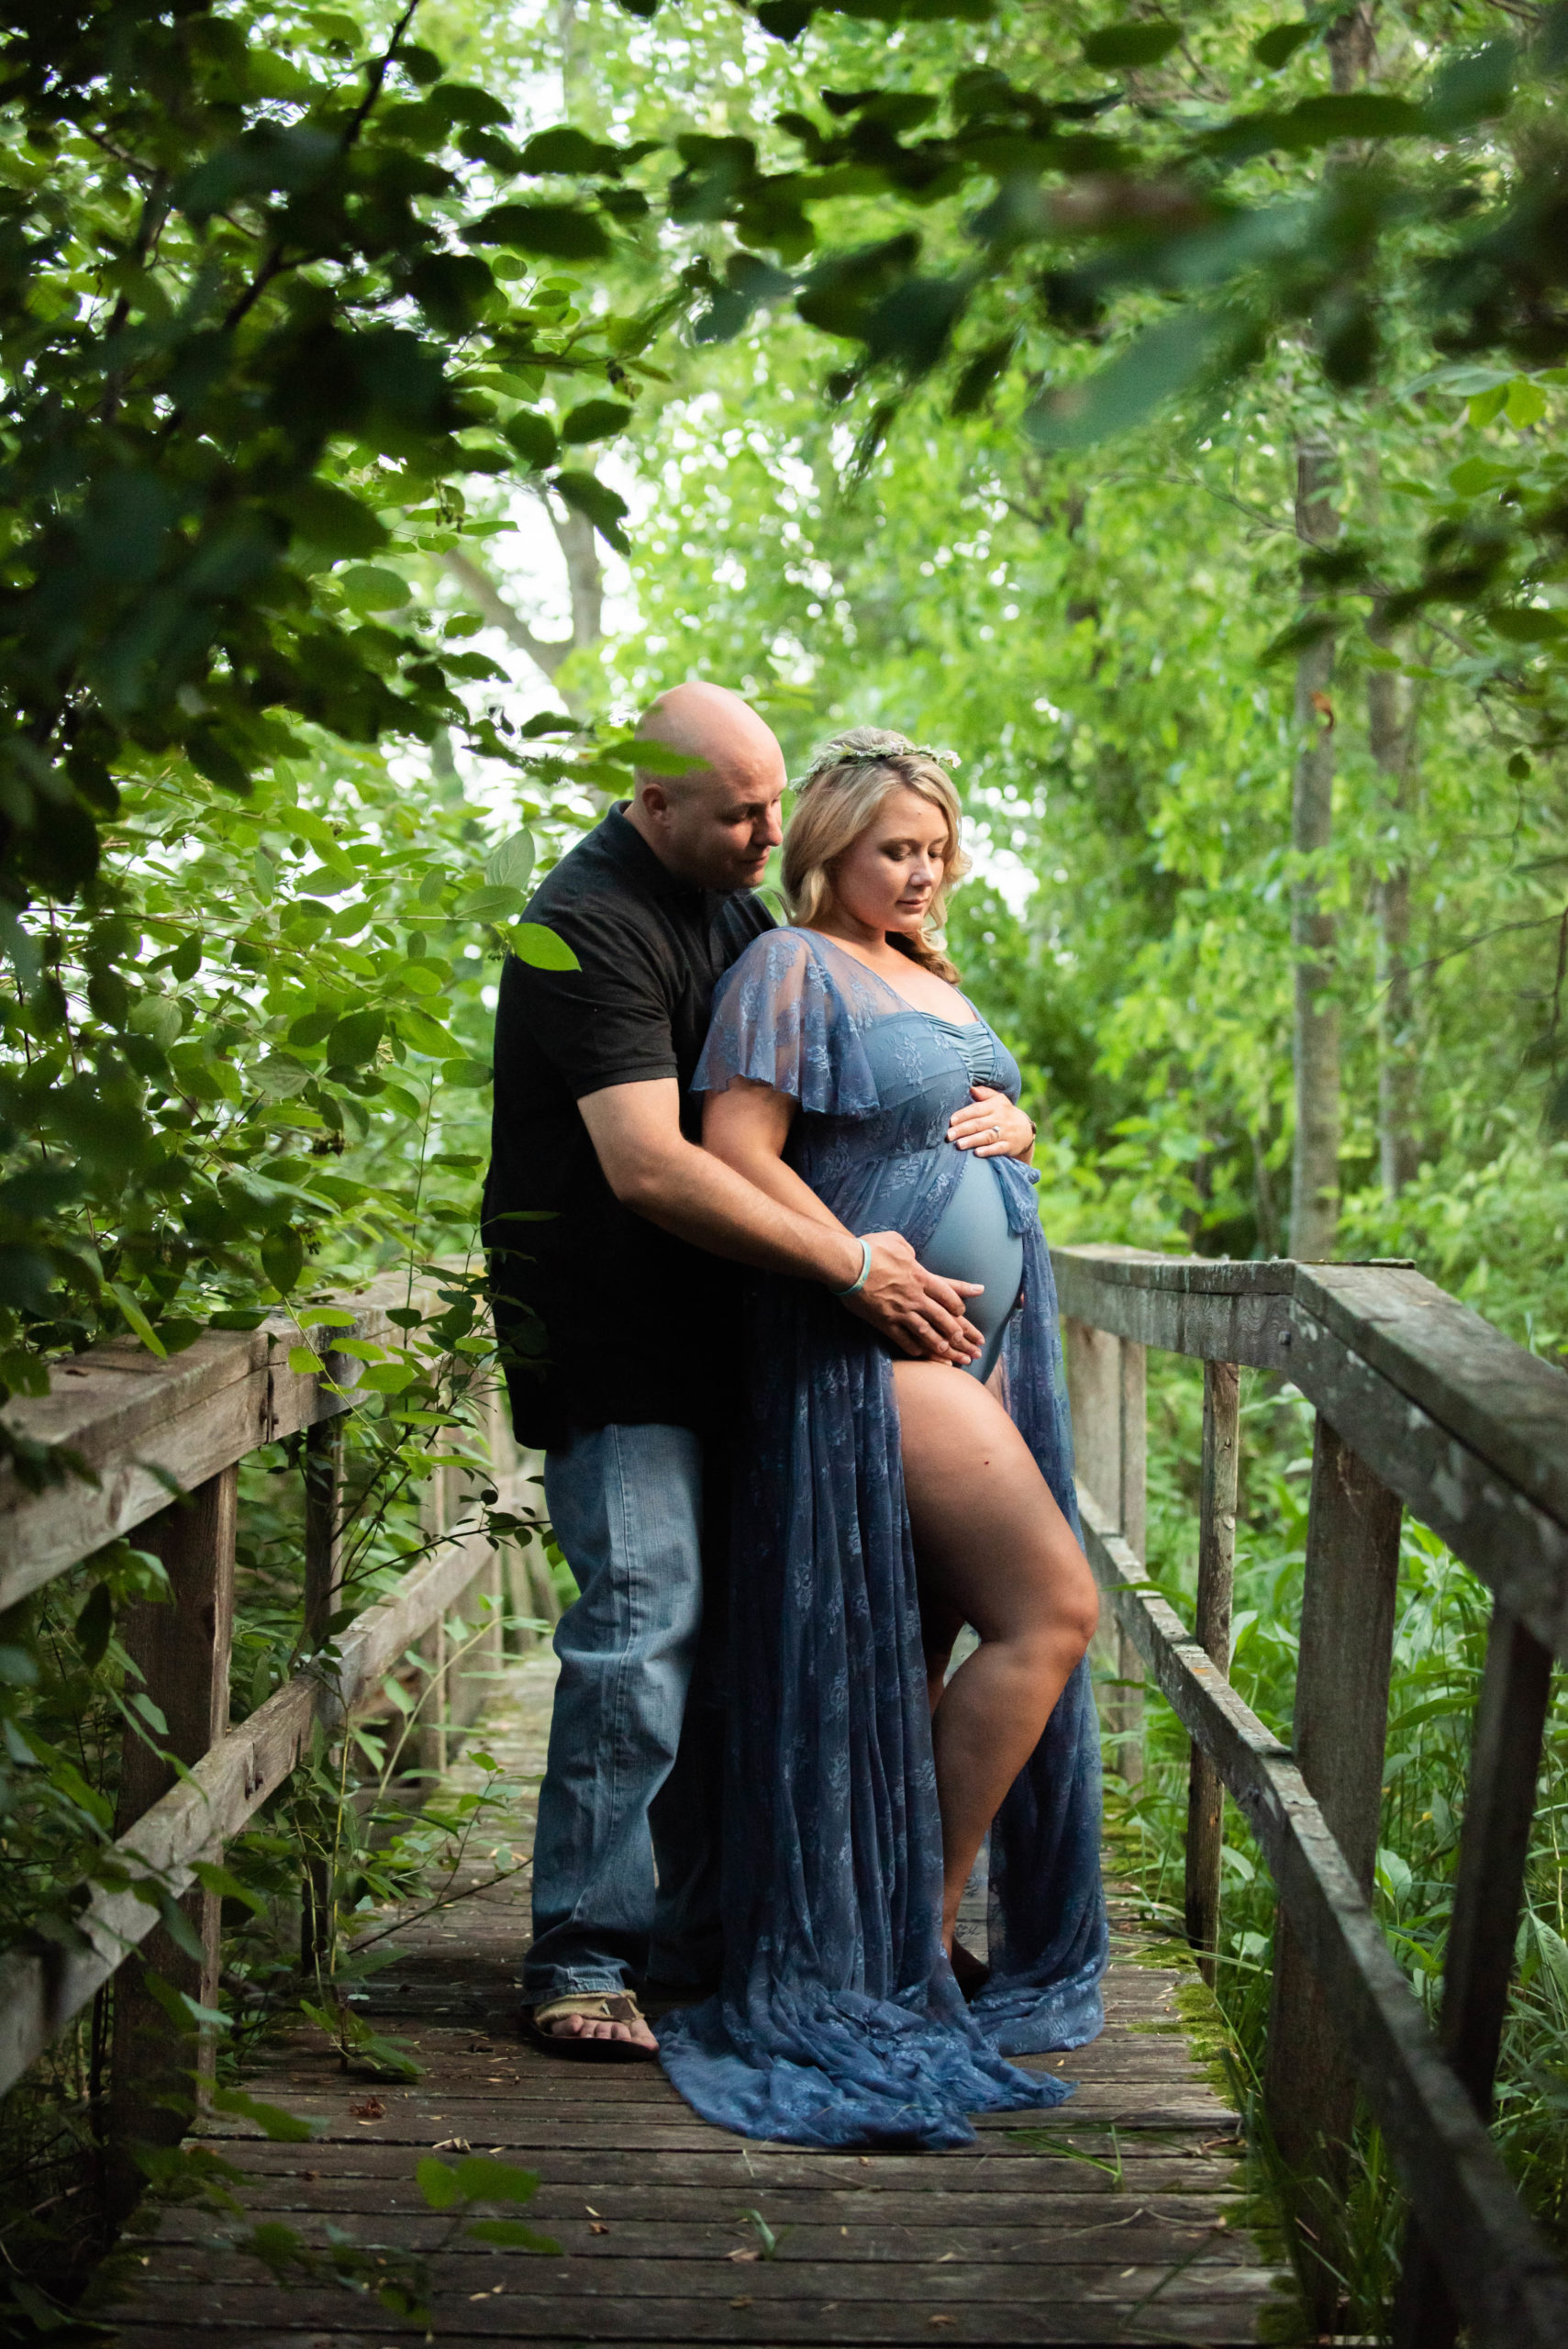 Plannning your maternity session